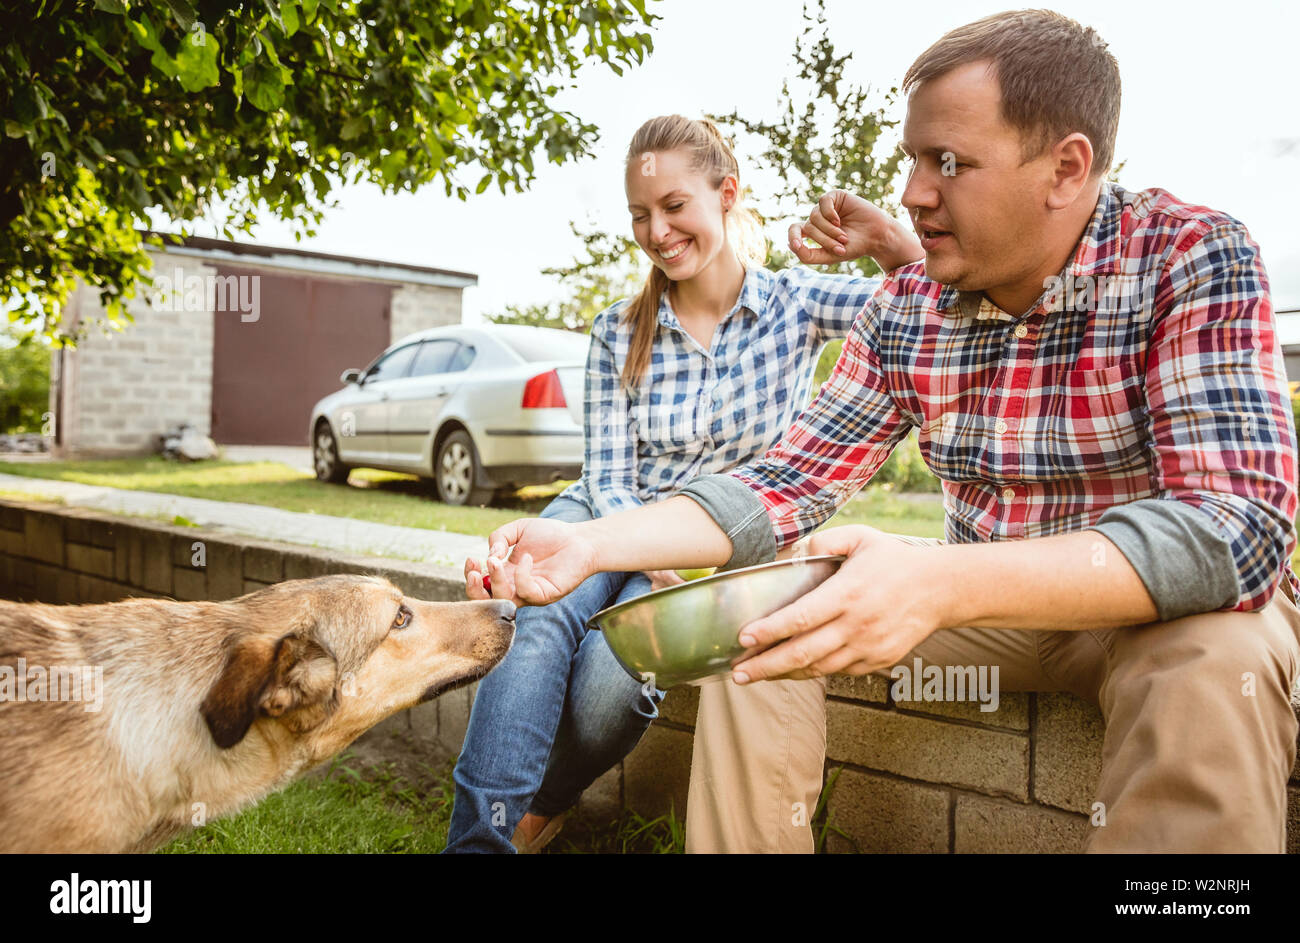 Young and happy farmer's couple at their garden near by home in sunny day. Man and woman playing with their dog and laughting. Concept of farming, agriculture, healthy lifestyle, family, relations. Stock Photo